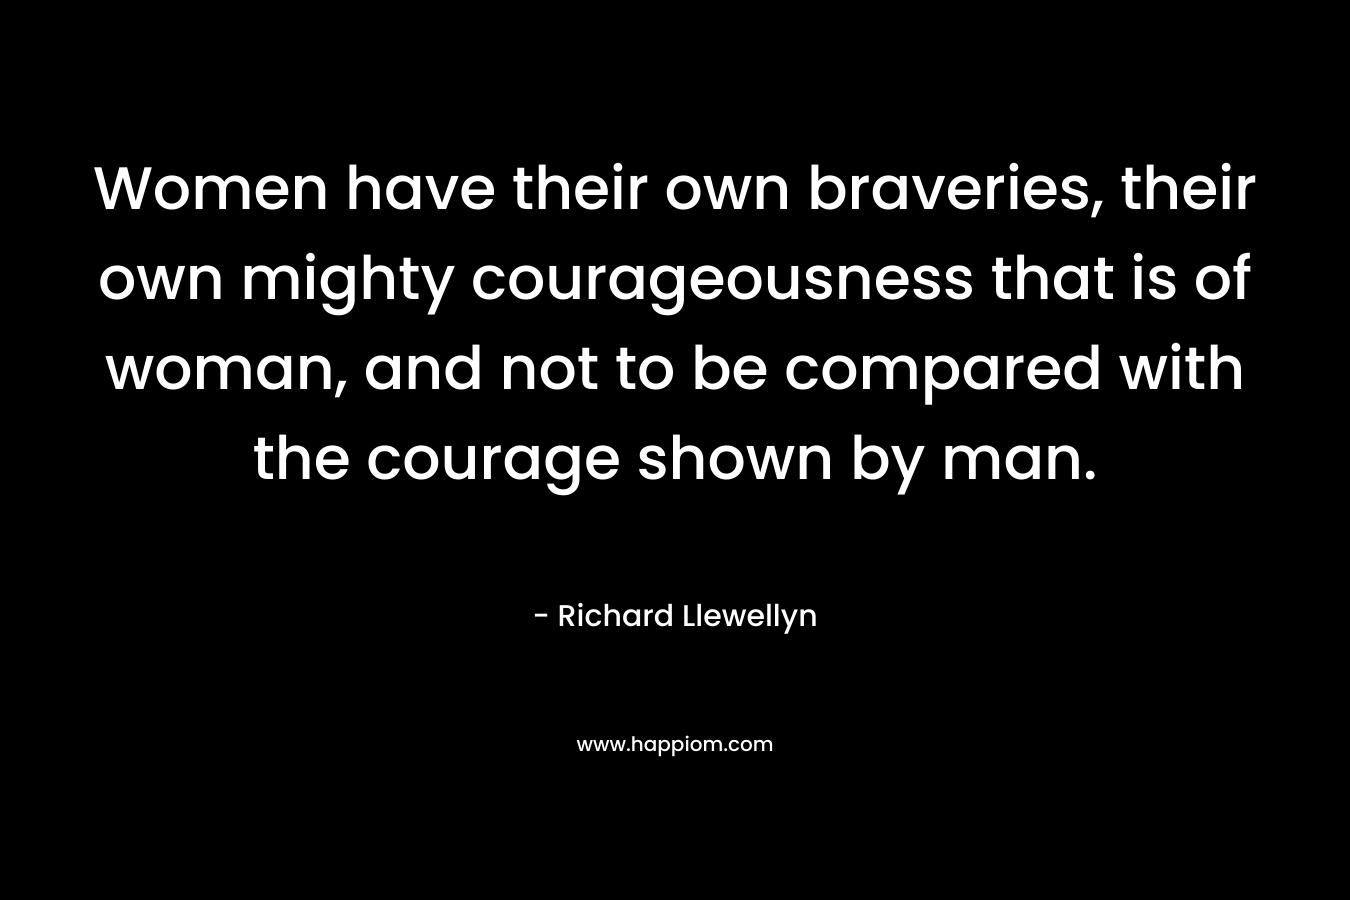 Women have their own braveries, their own mighty courageousness that is of woman, and not to be compared with the courage shown by man. – Richard Llewellyn